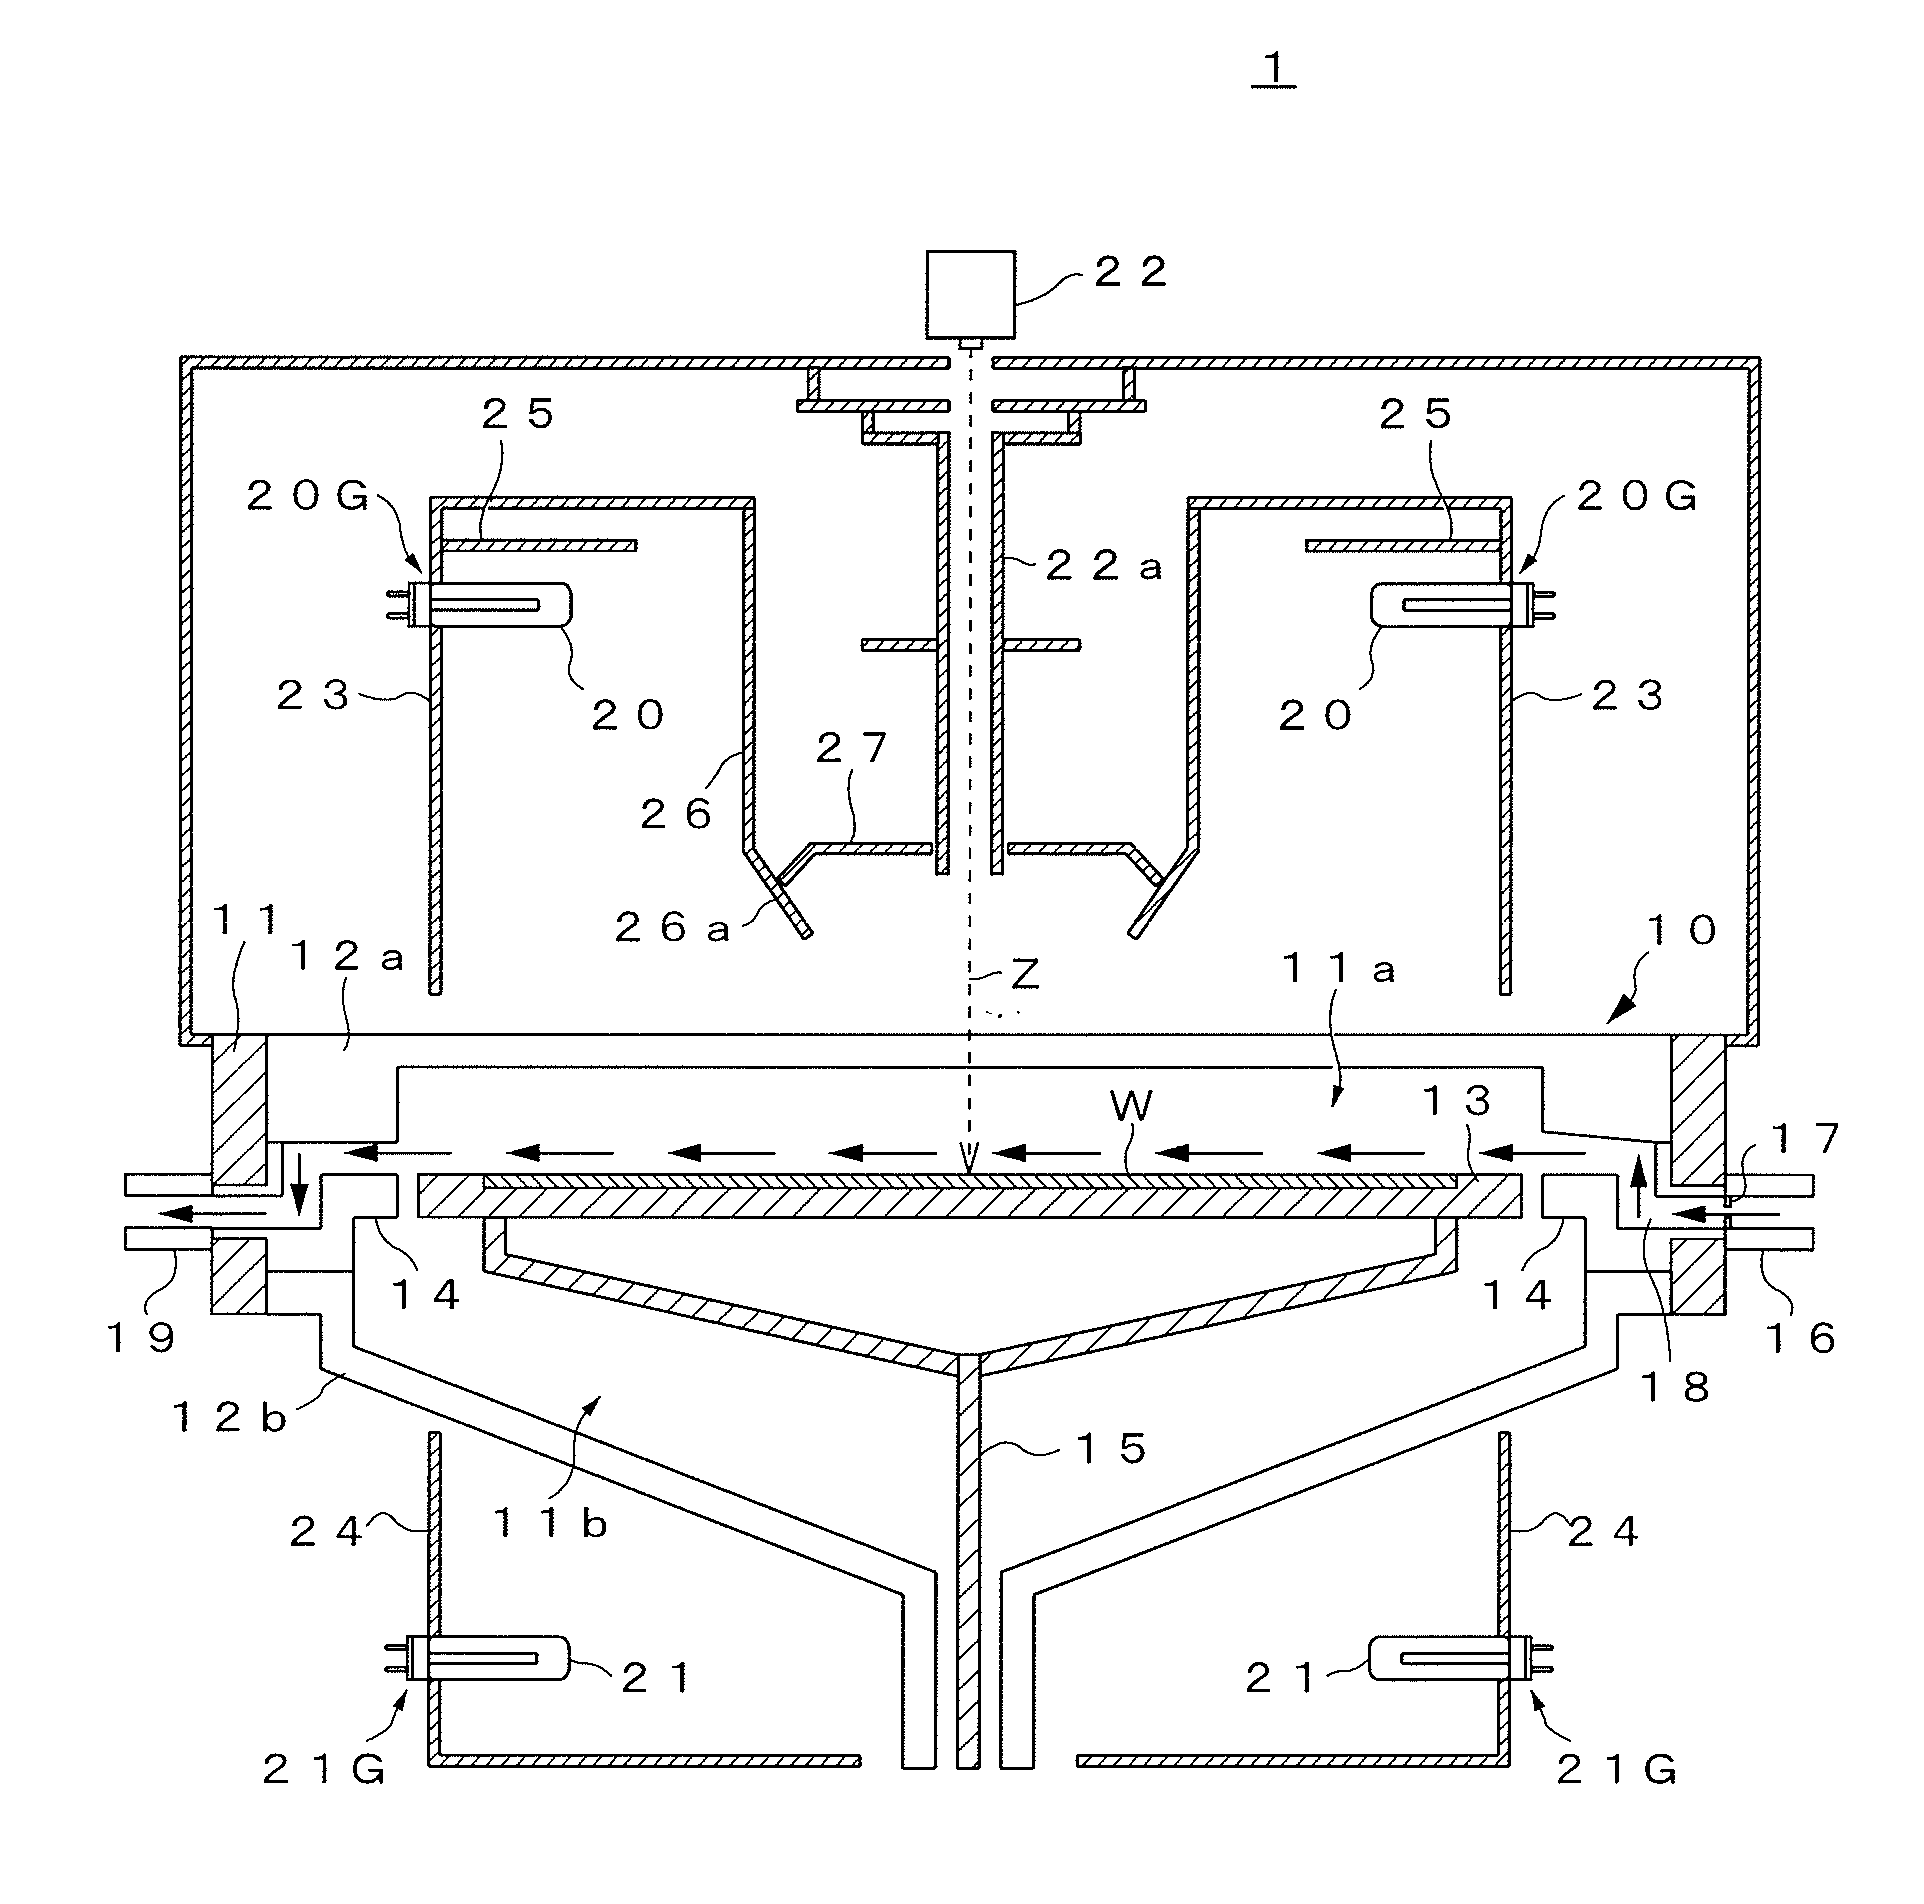 Epitaxial growth apparatus